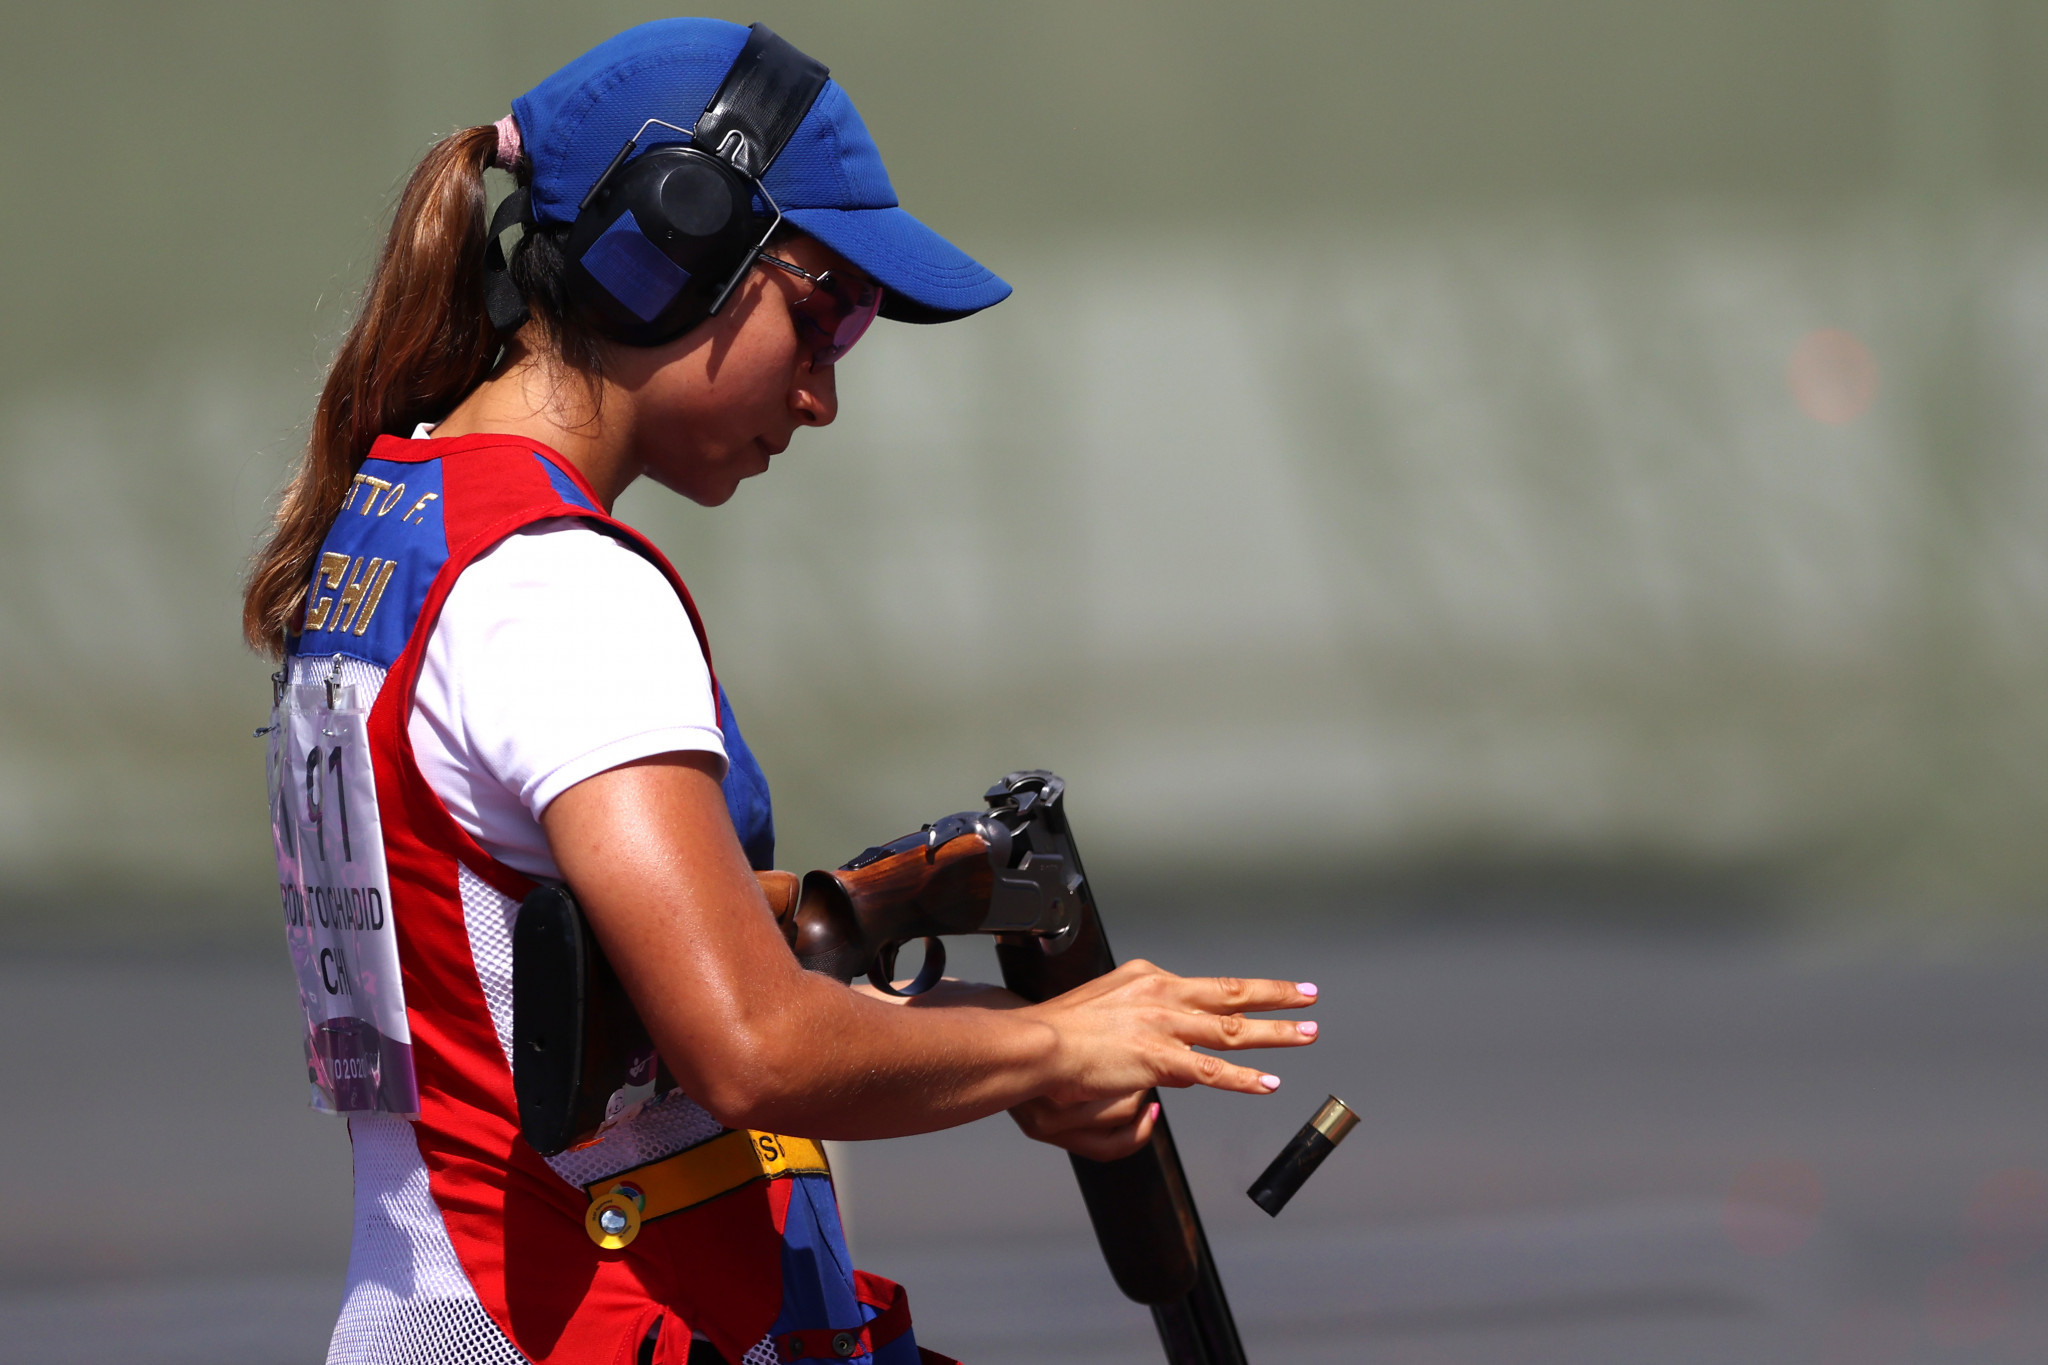 Shooter Crovetto wins host nation Chile's first gold of Santiago 2023